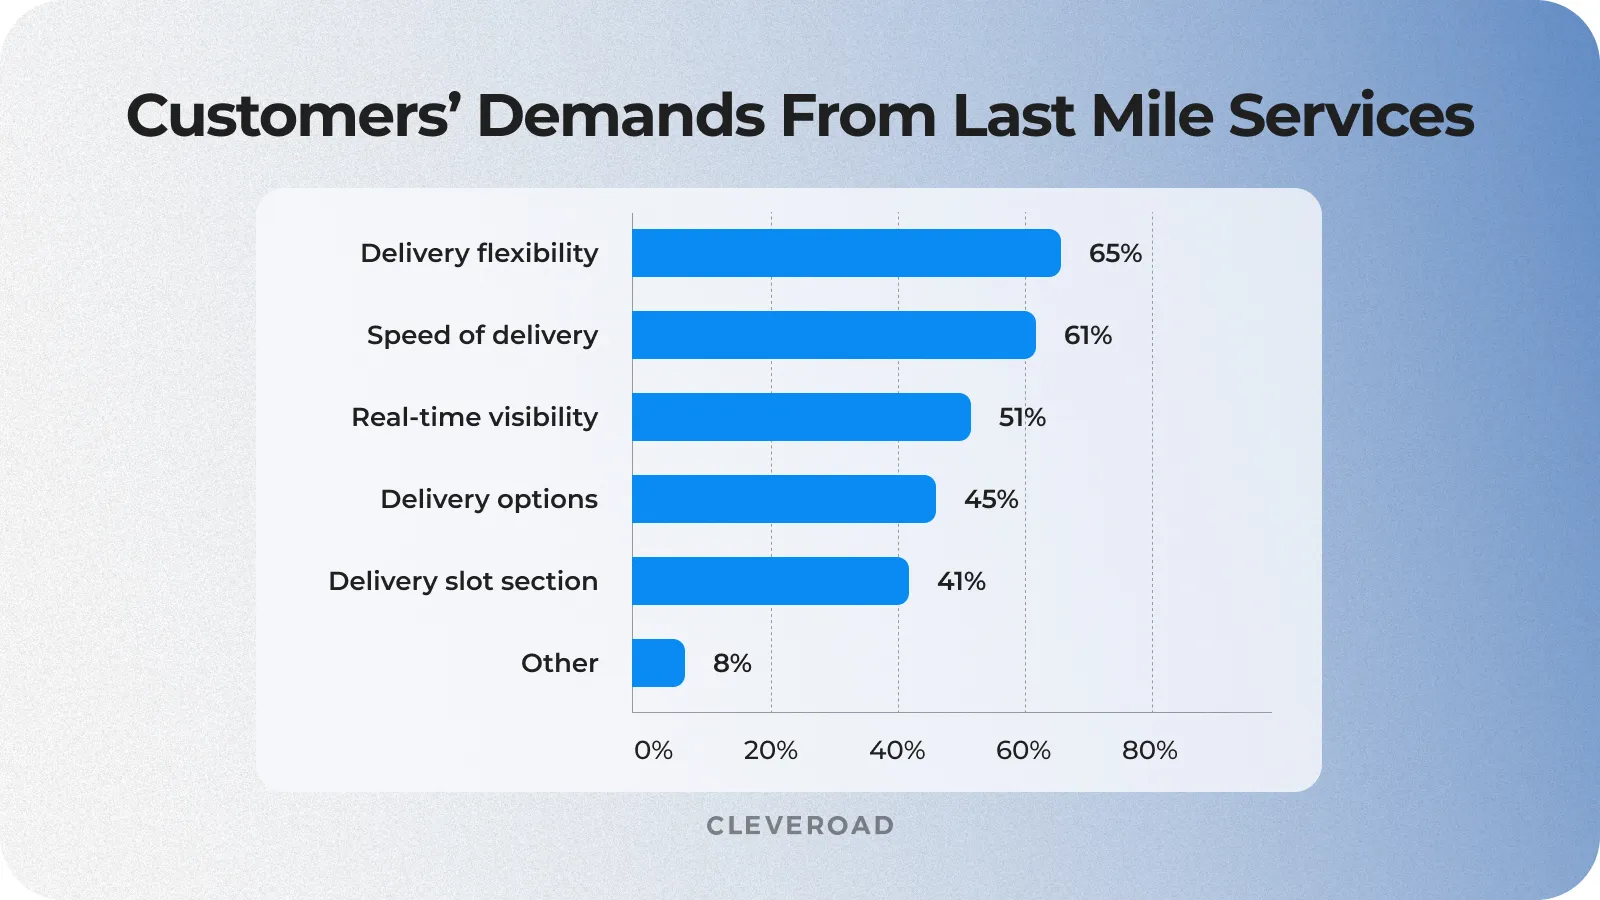 What customers expect from last mile services